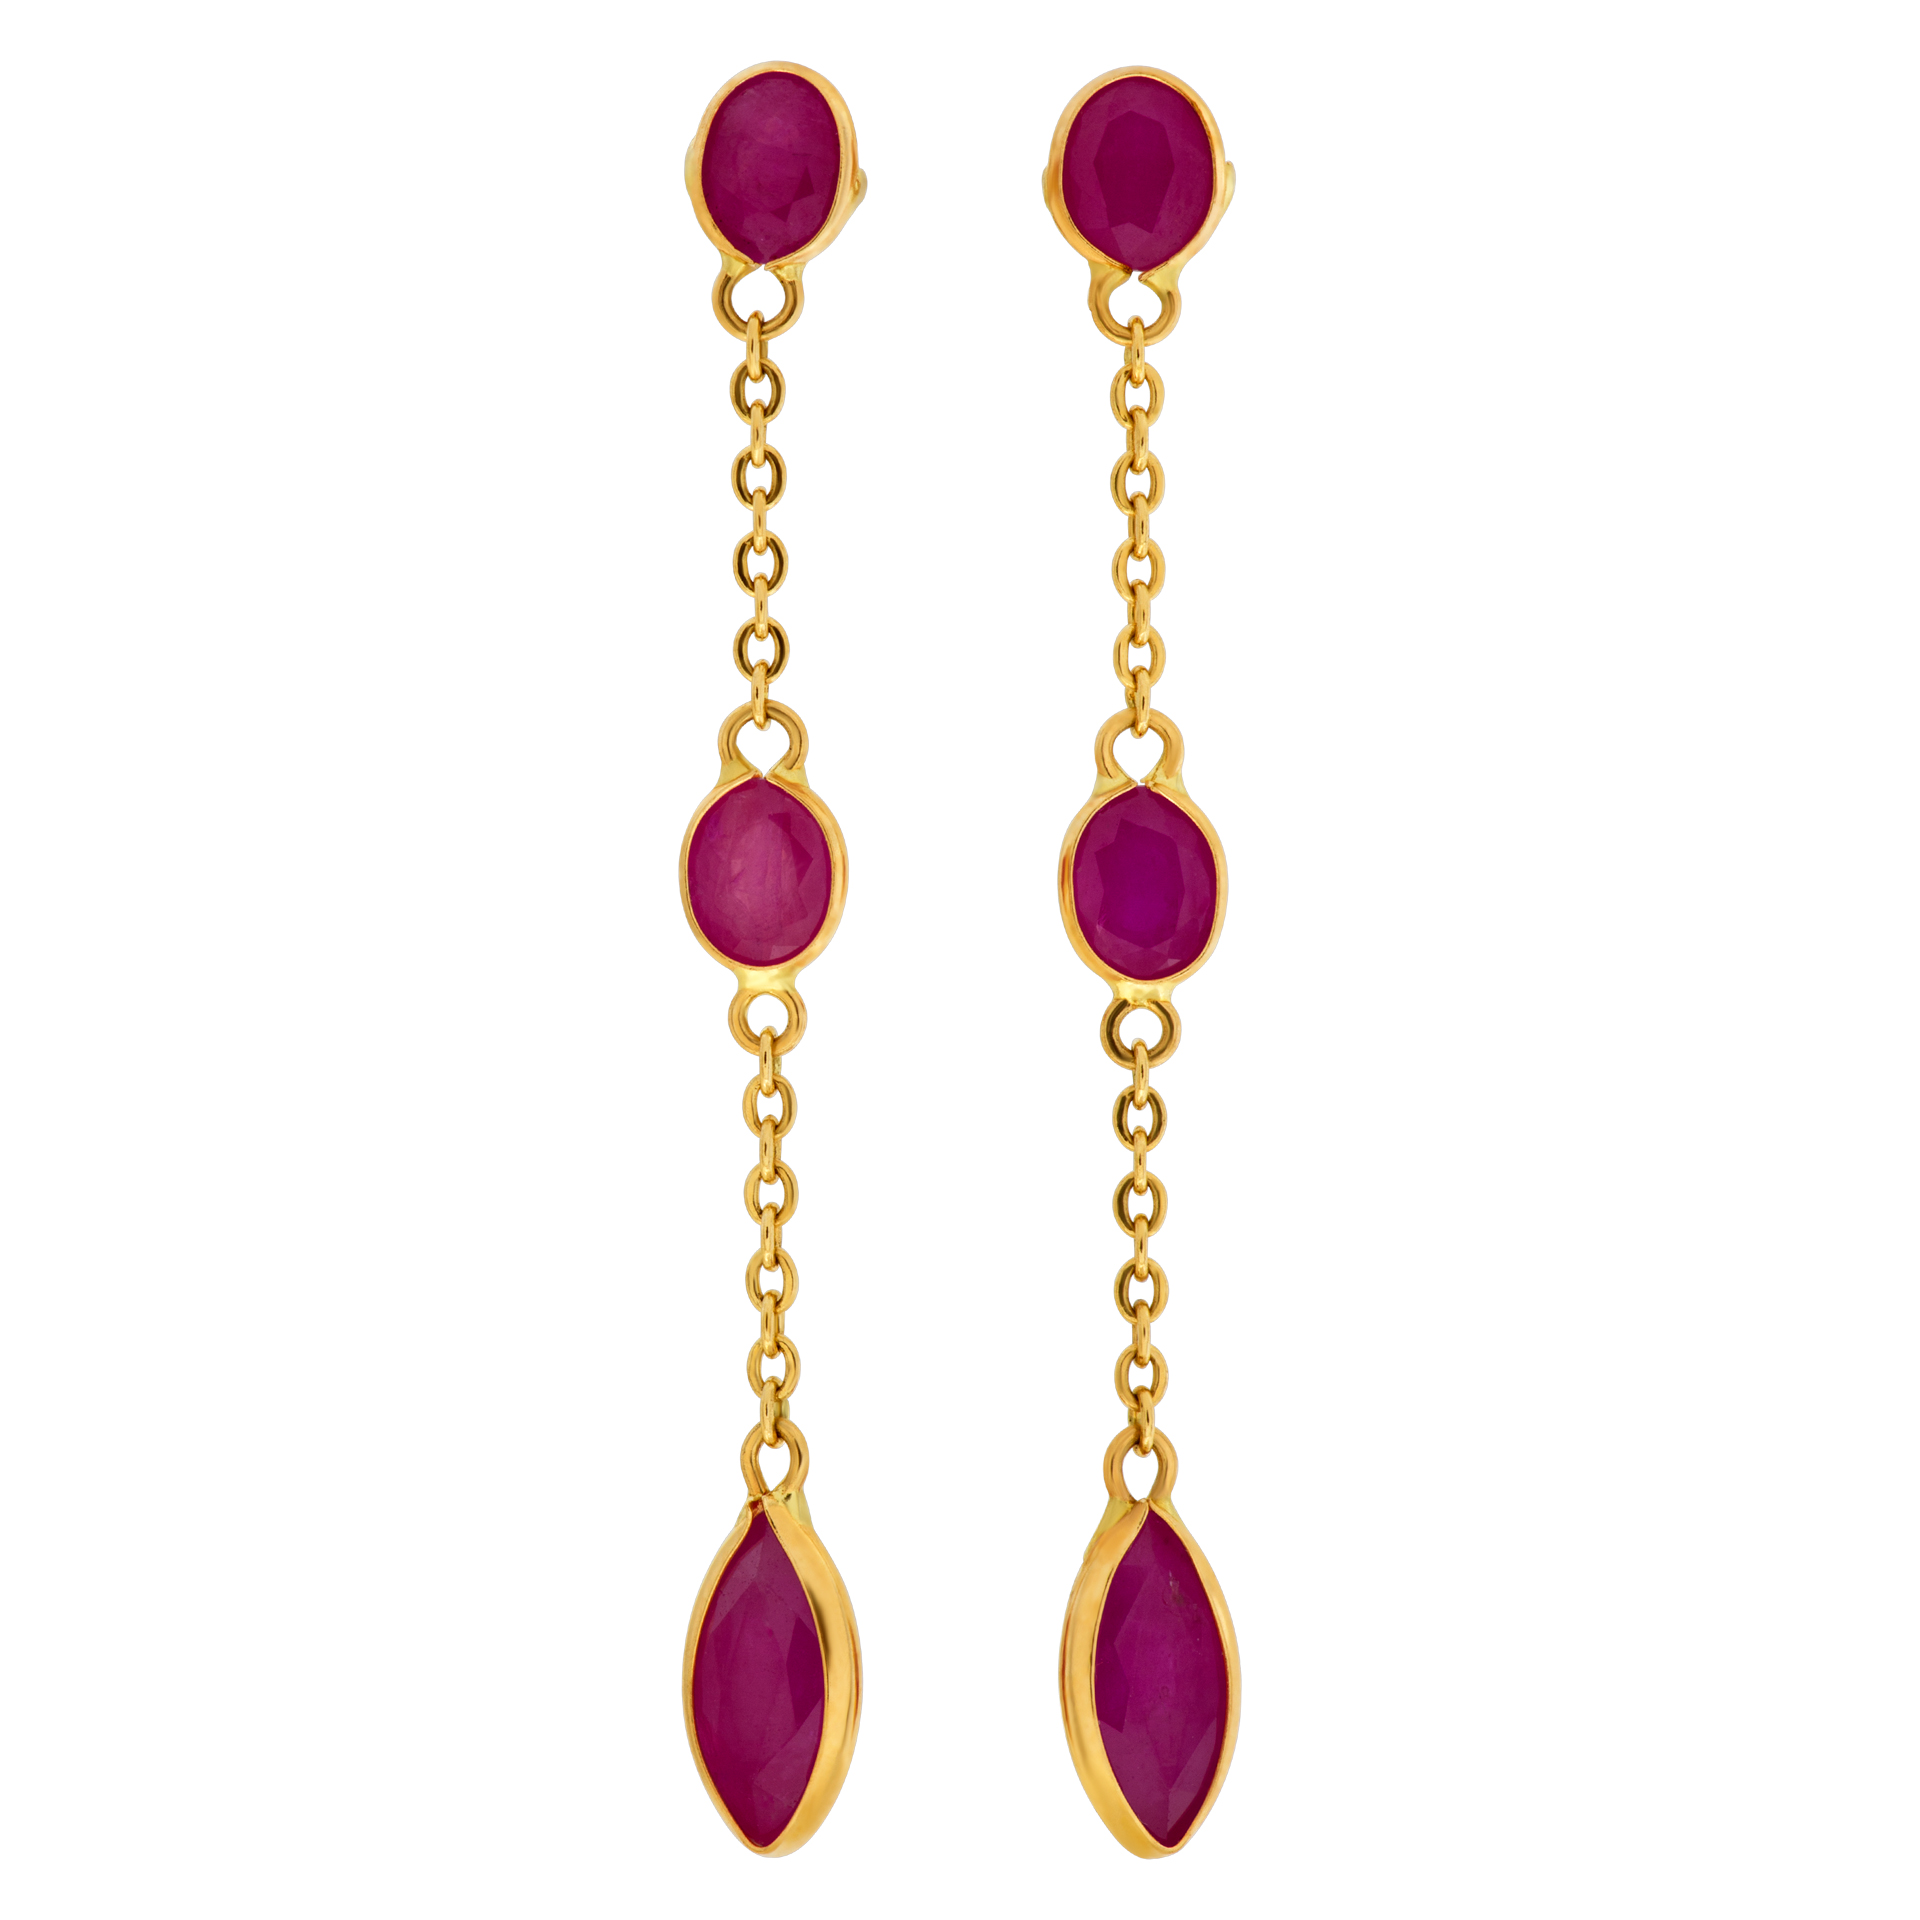 Elegant ruby drop earrings in 14k yellow gold with approximately 3.23 carats in rubies. 1.5" hanging length